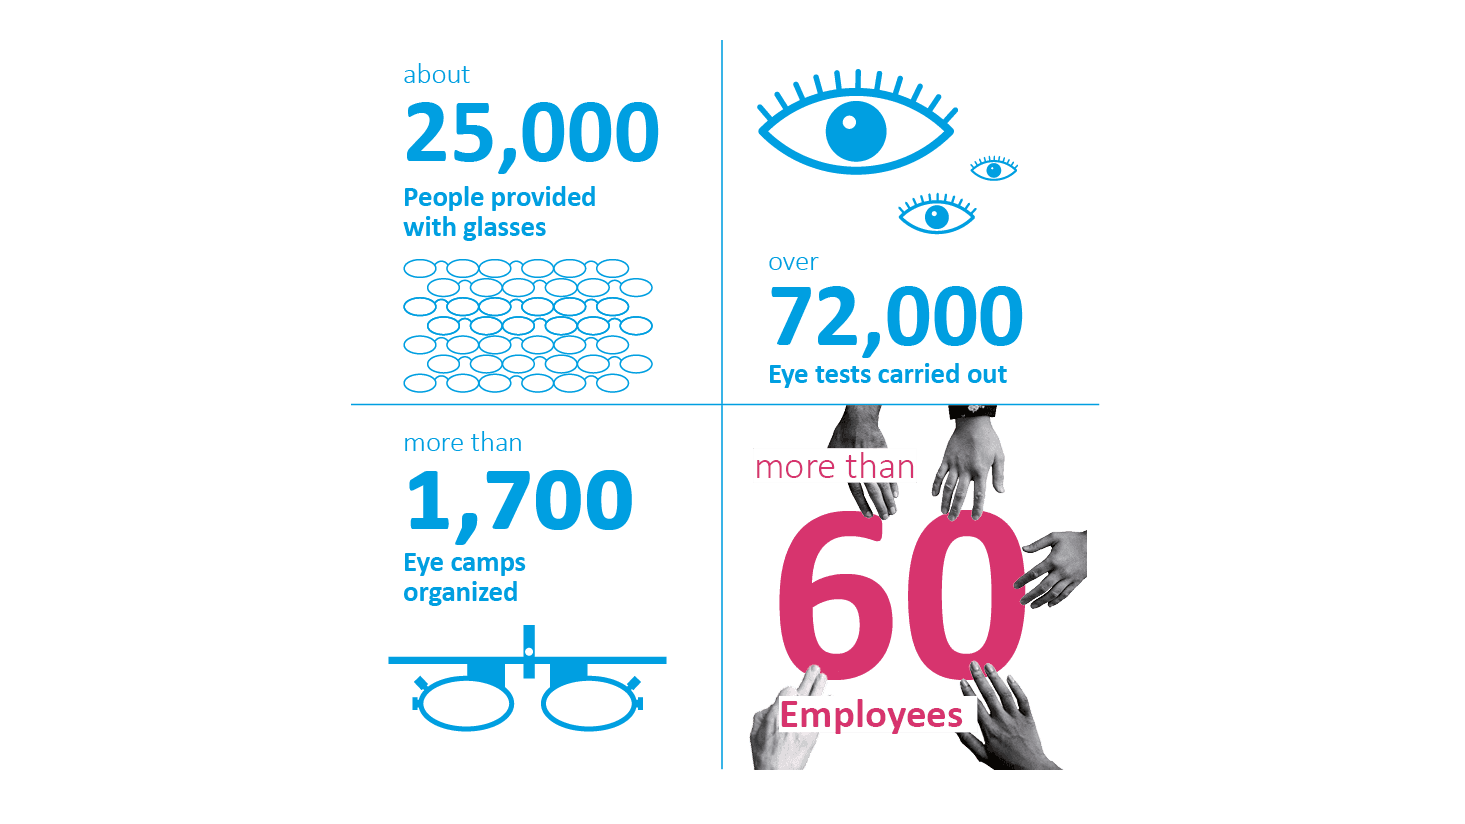 Facts and figures on good eyesight in India